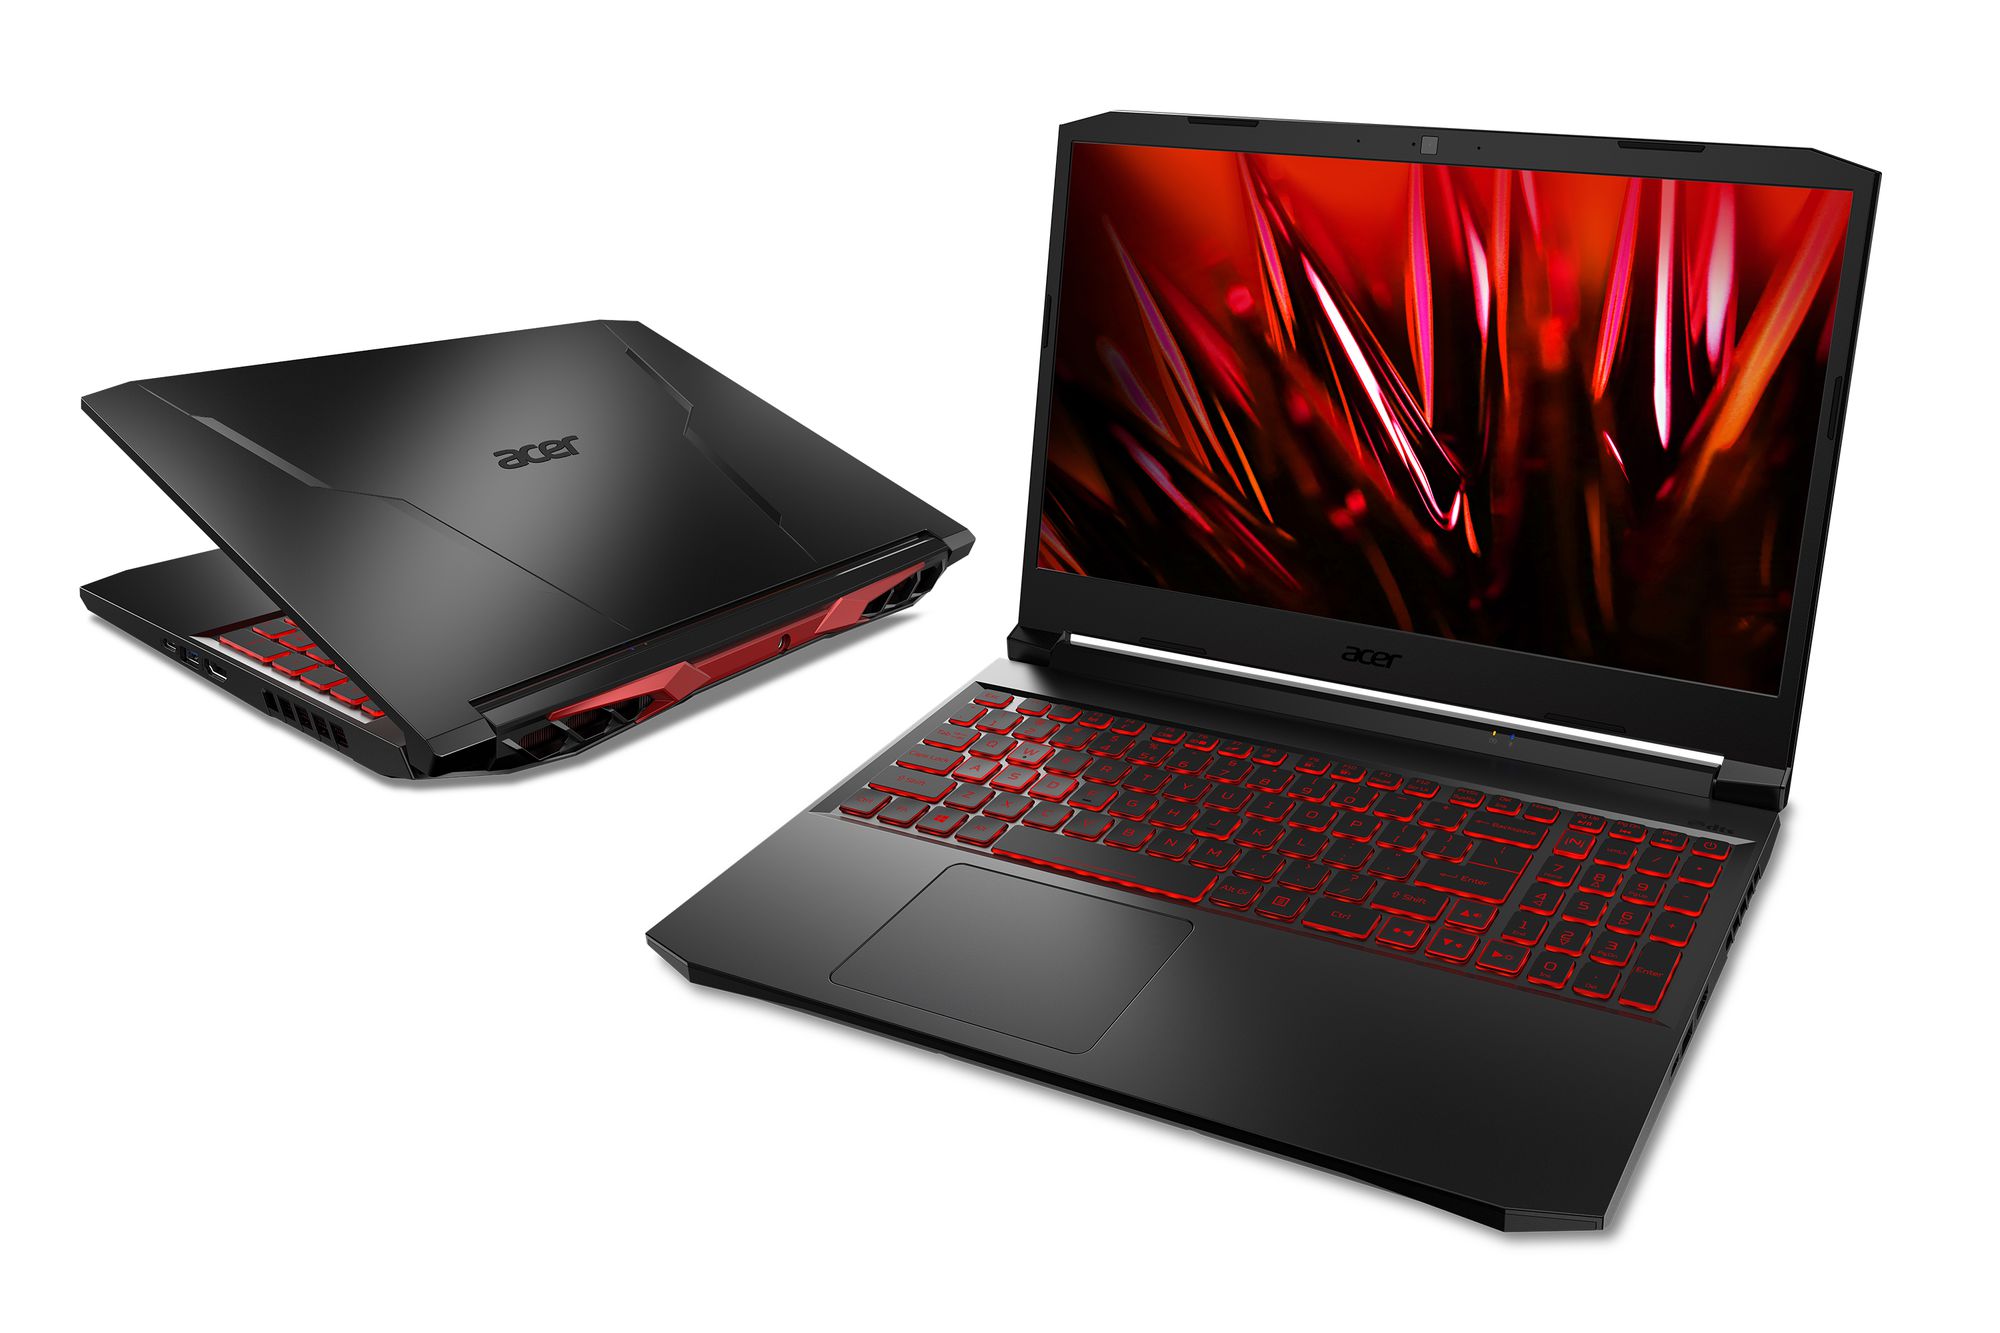 Power Up Your Gaming With These Laptops Under $800!